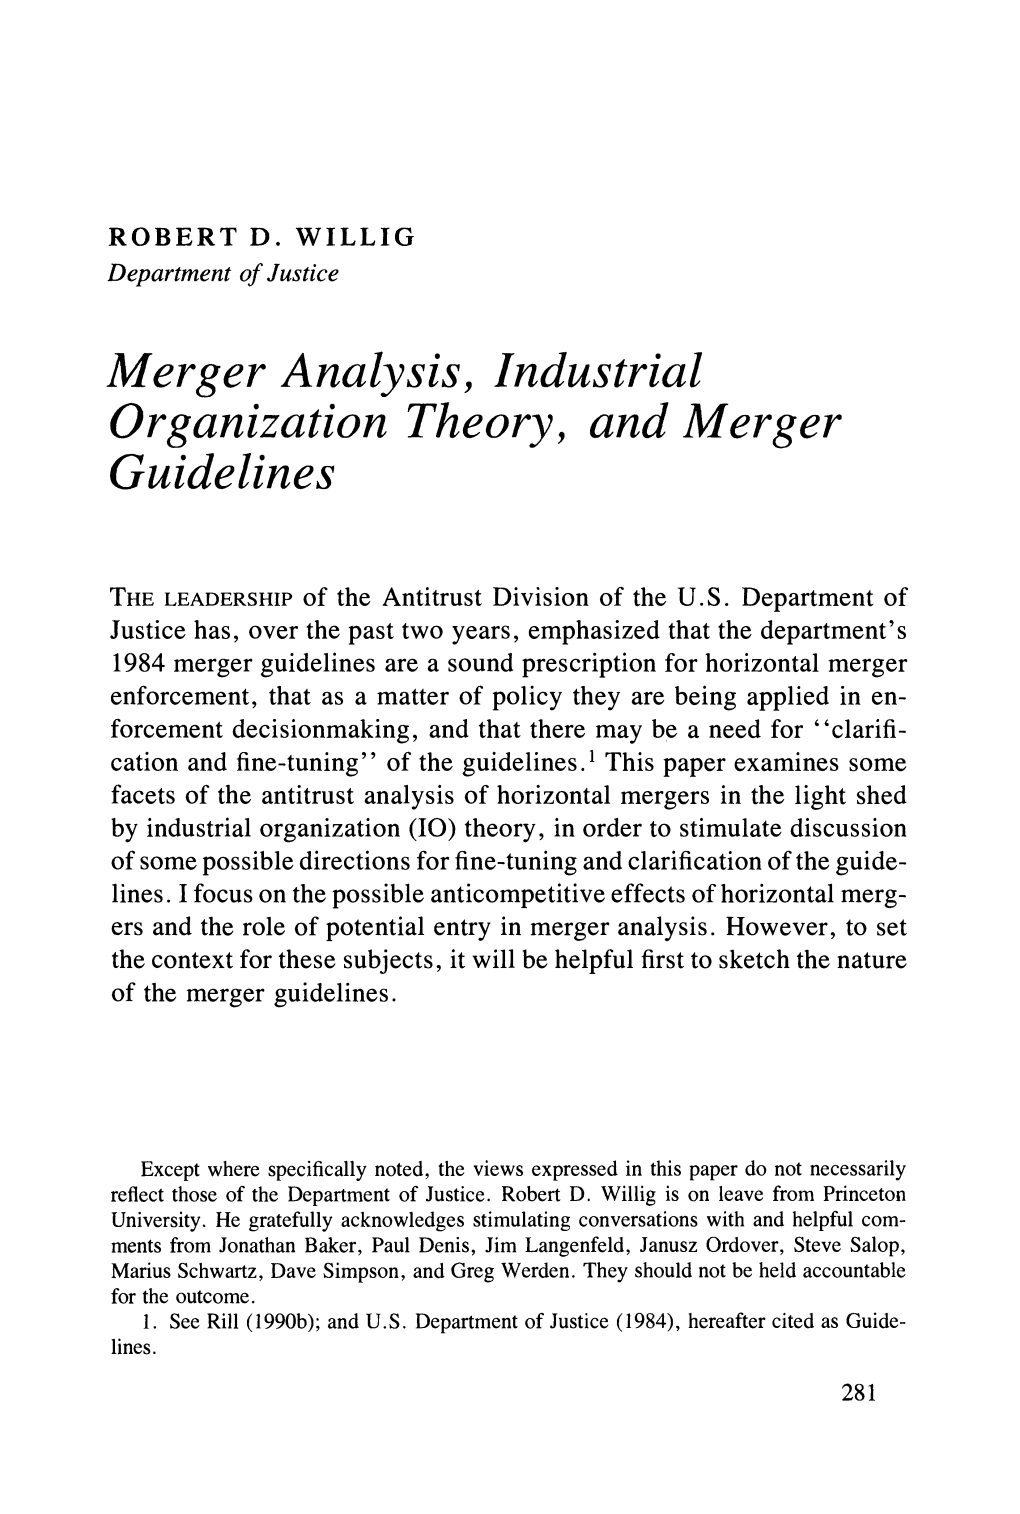 Merger Analysis, Industrial Organization Theory, and Merger Guidelines